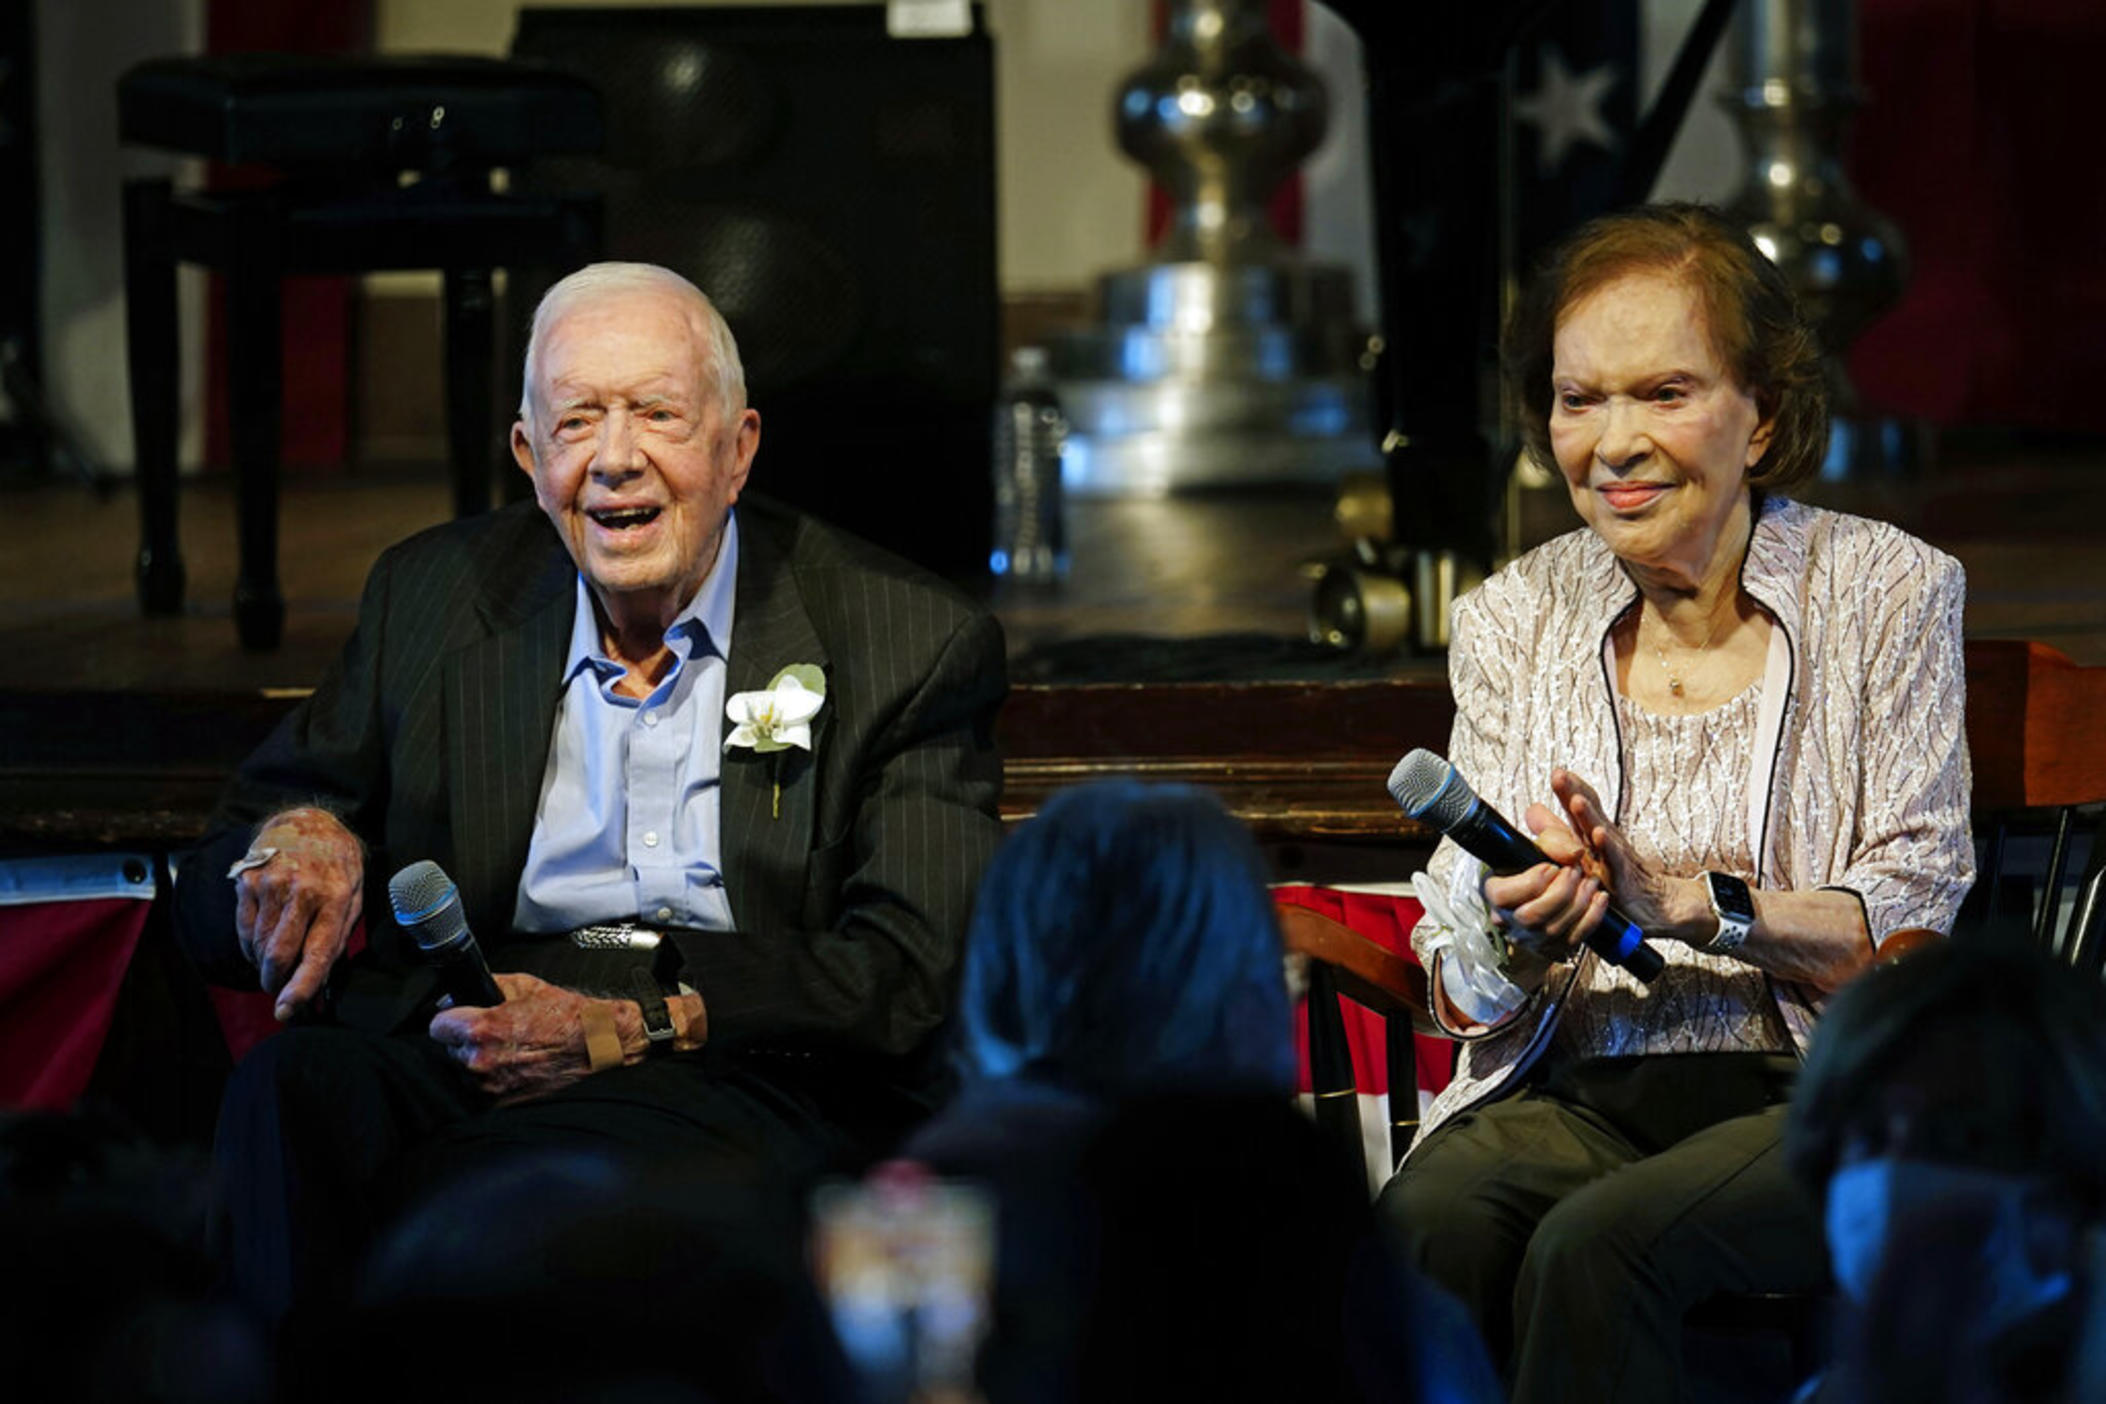 Former U.S. President Jimmy Carter and his wife, former first lady Rosalynn Carter, sit together during a reception to celebrate their 75th wedding anniversary on Saturday, July 10, 2021, in Plains, Ga. 